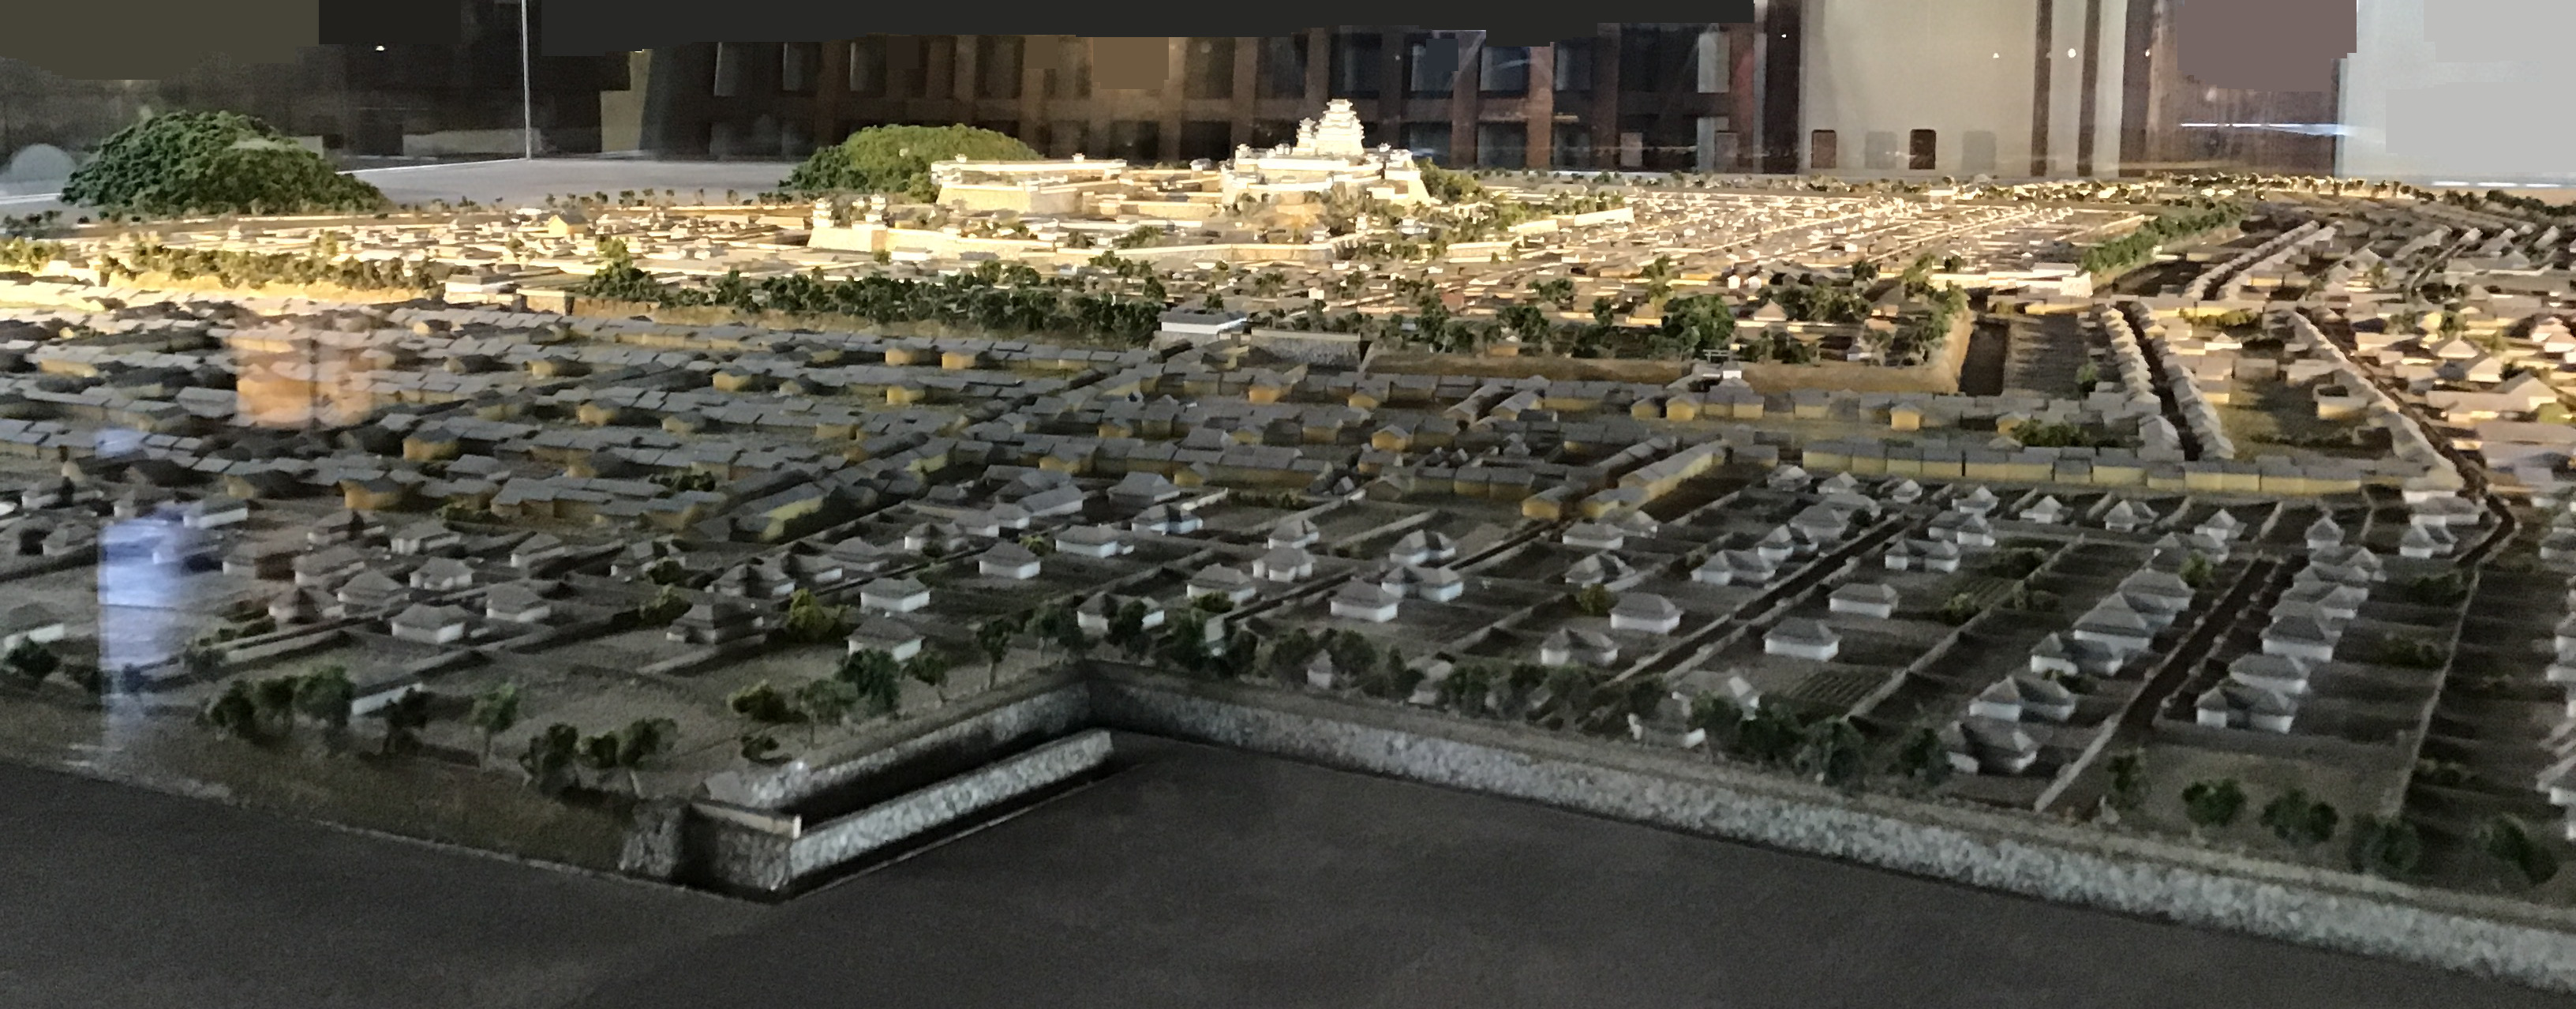 A model of Himeji Castle and surrounding area